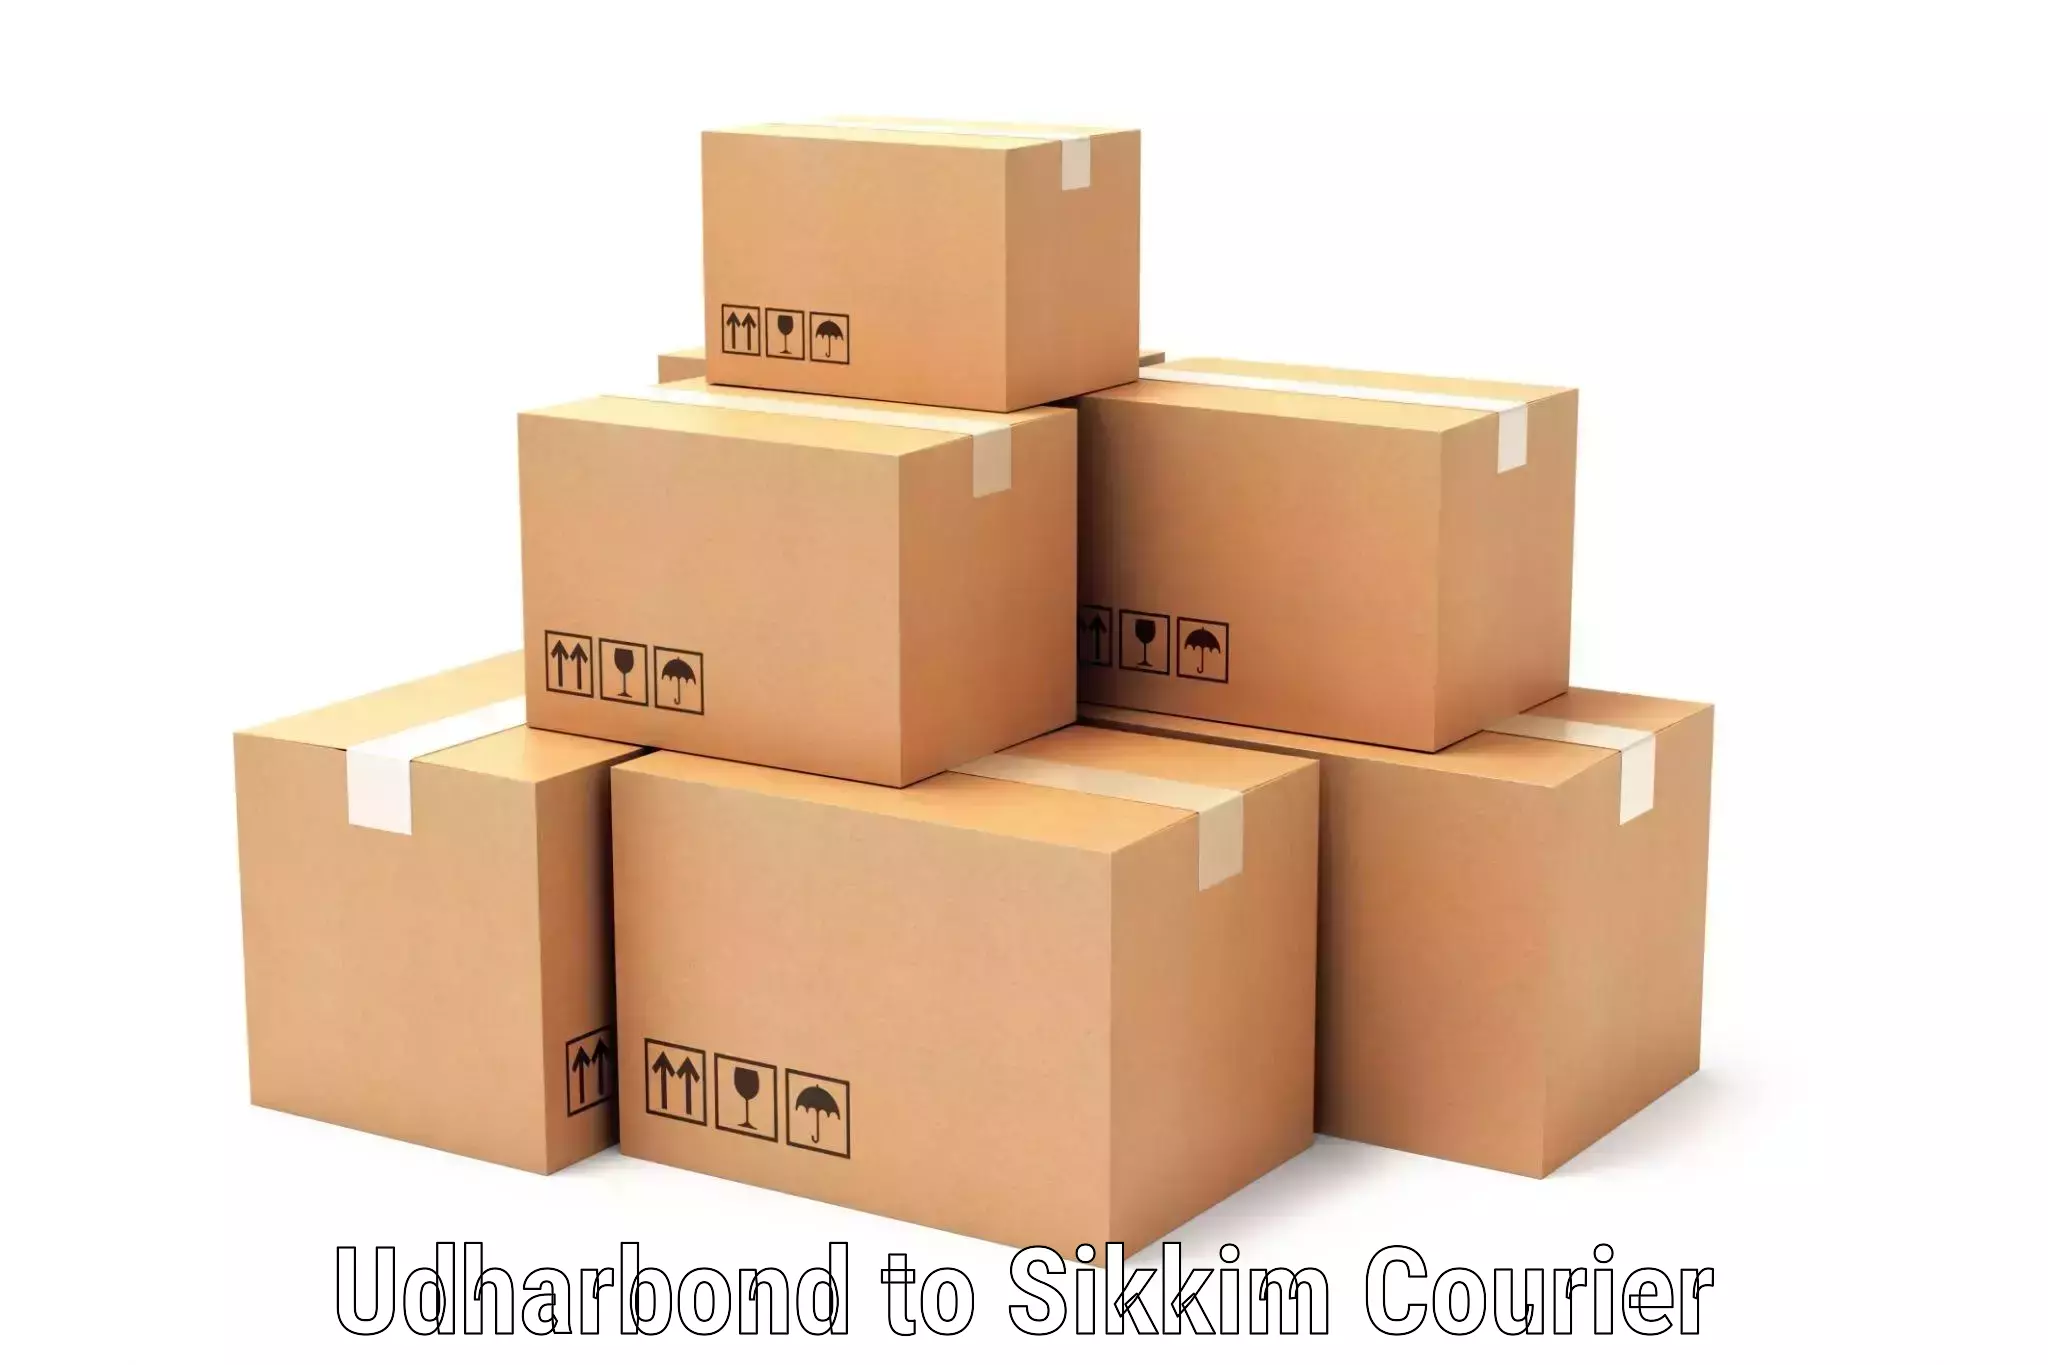 Parcel handling and care in Udharbond to South Sikkim